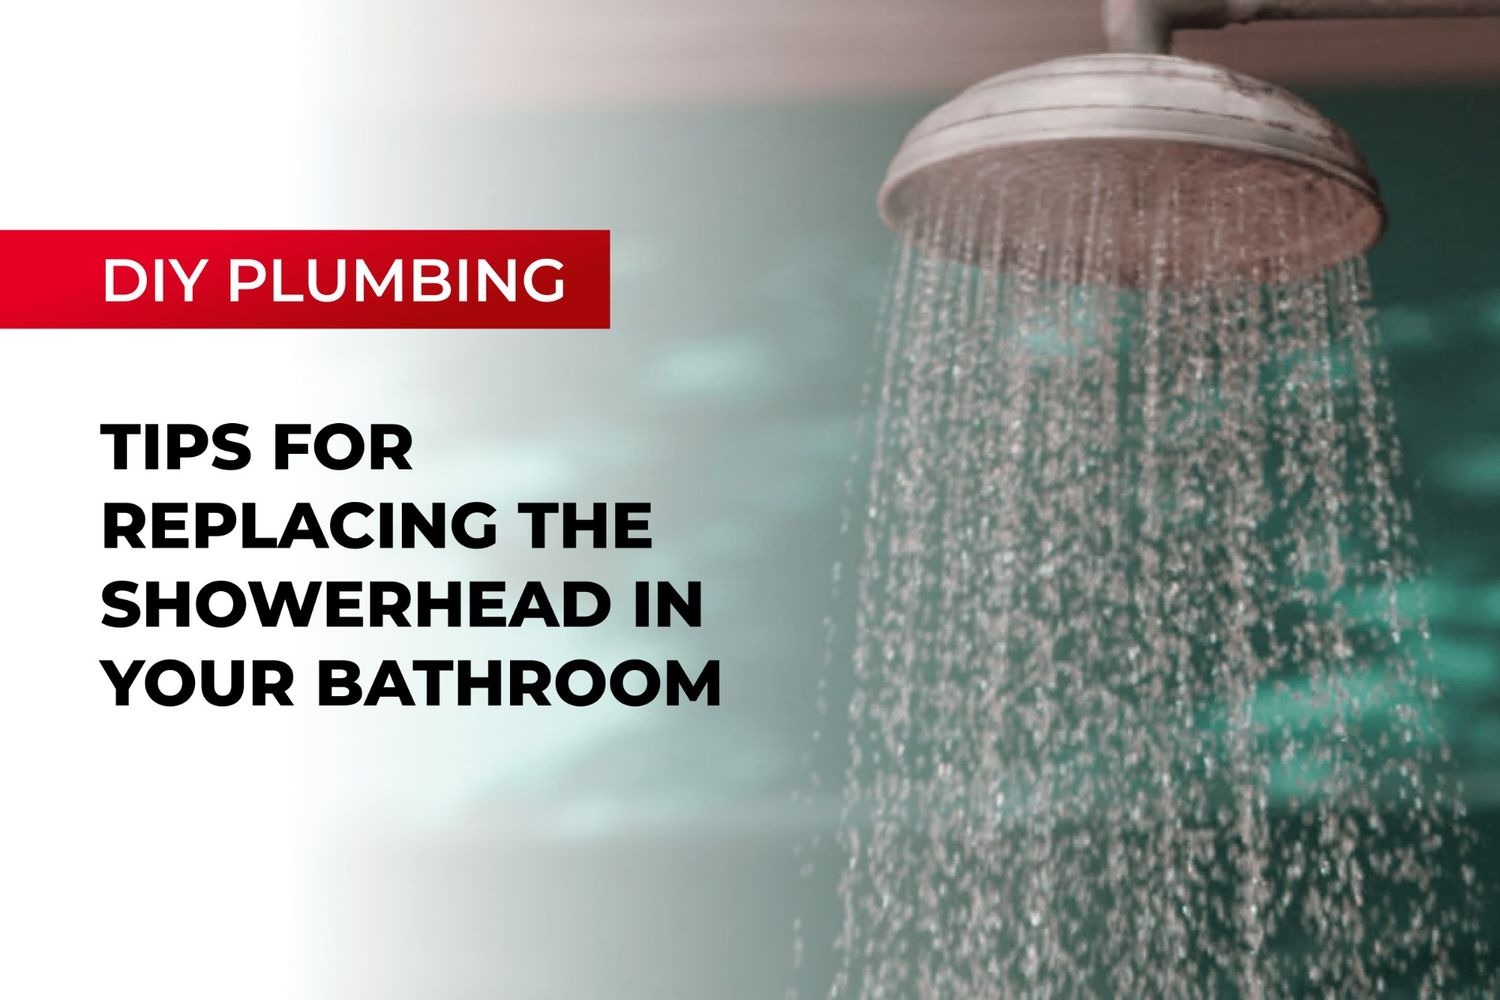 Tips for Replacing the Showerhead in Your Bathroom